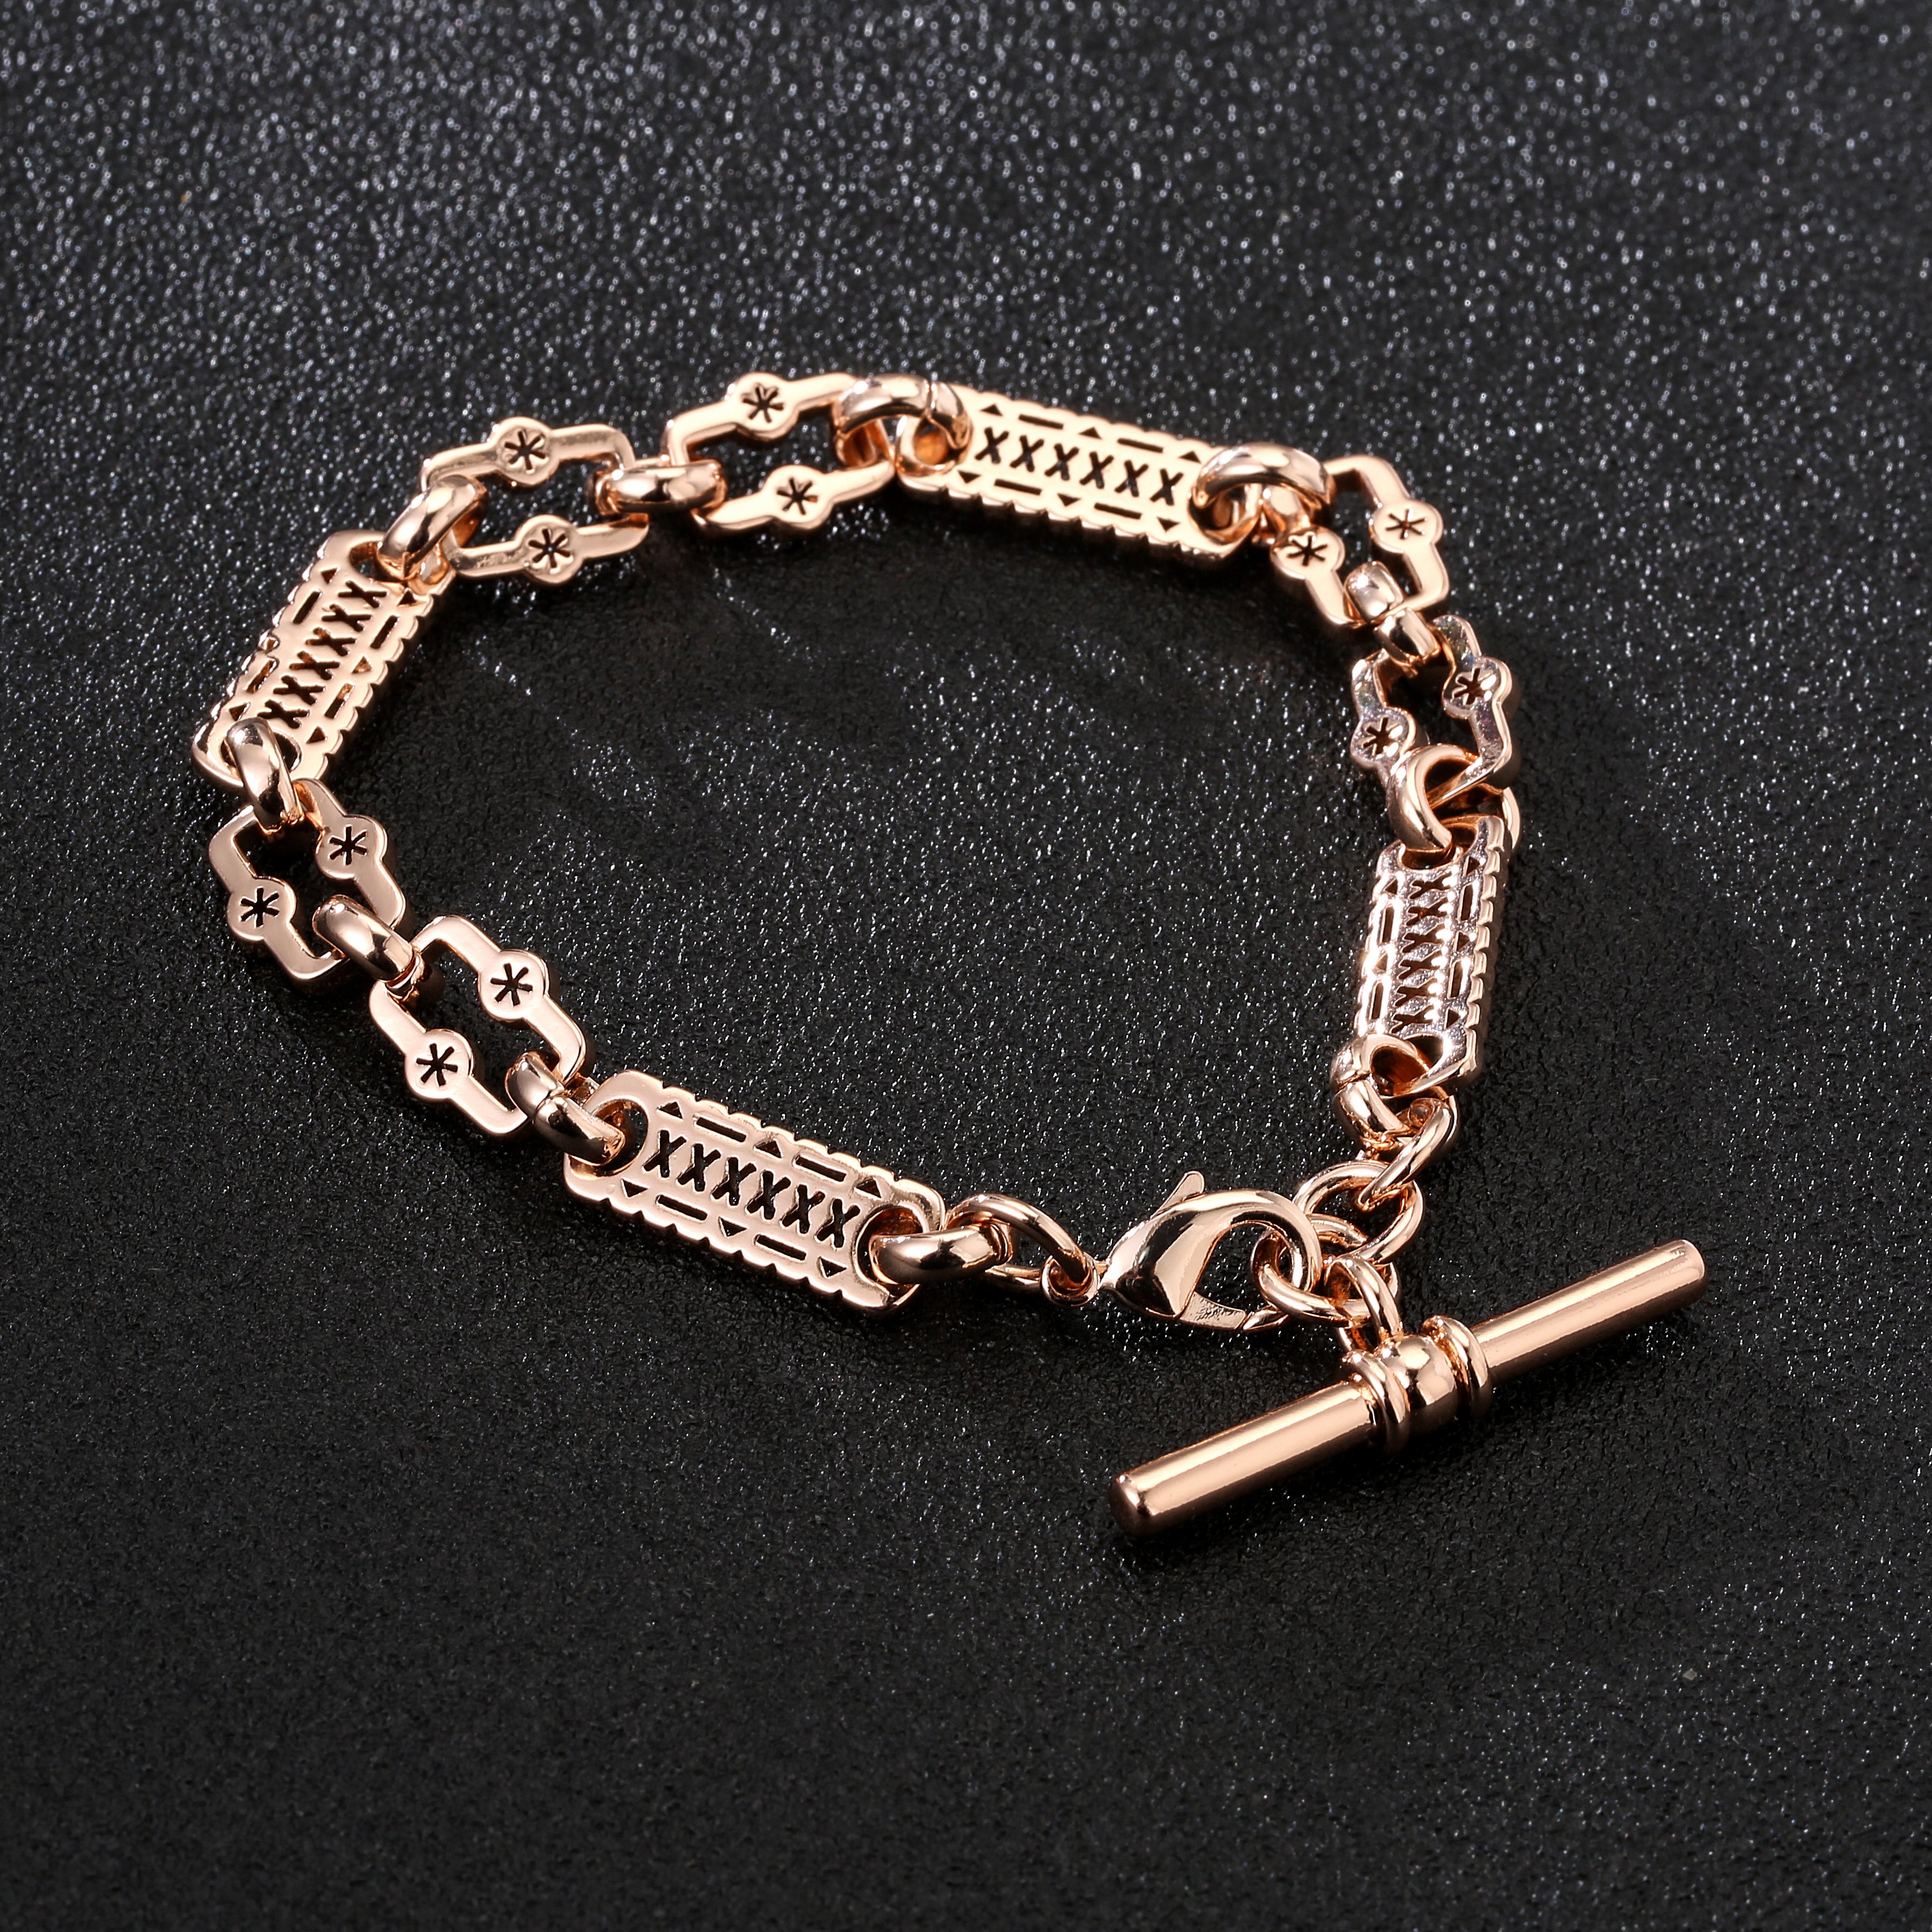 Luxury Rose Gold Stars and Bars T-Bar Bracelet and Chain Set